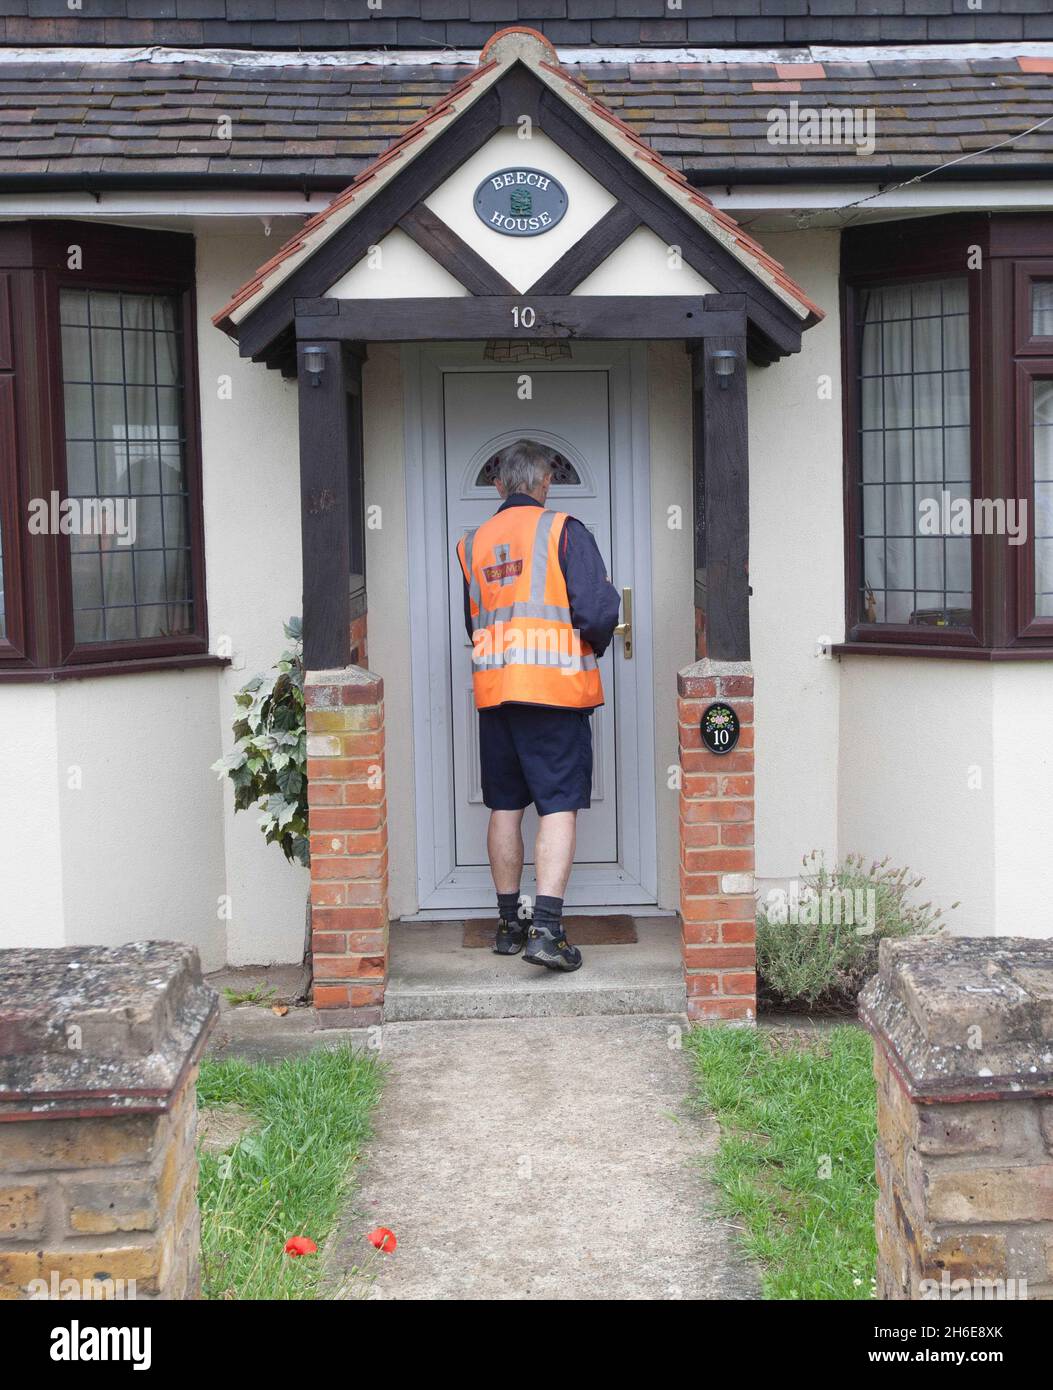 The home of hacker Ryan Cleary in Wickford, Essex, this morning. The British teenager is suspected of masterminding the global computer hacking group LulzSec from his bedroom and could face a fight against extradition to the US after being arrested by police. Stock Photo